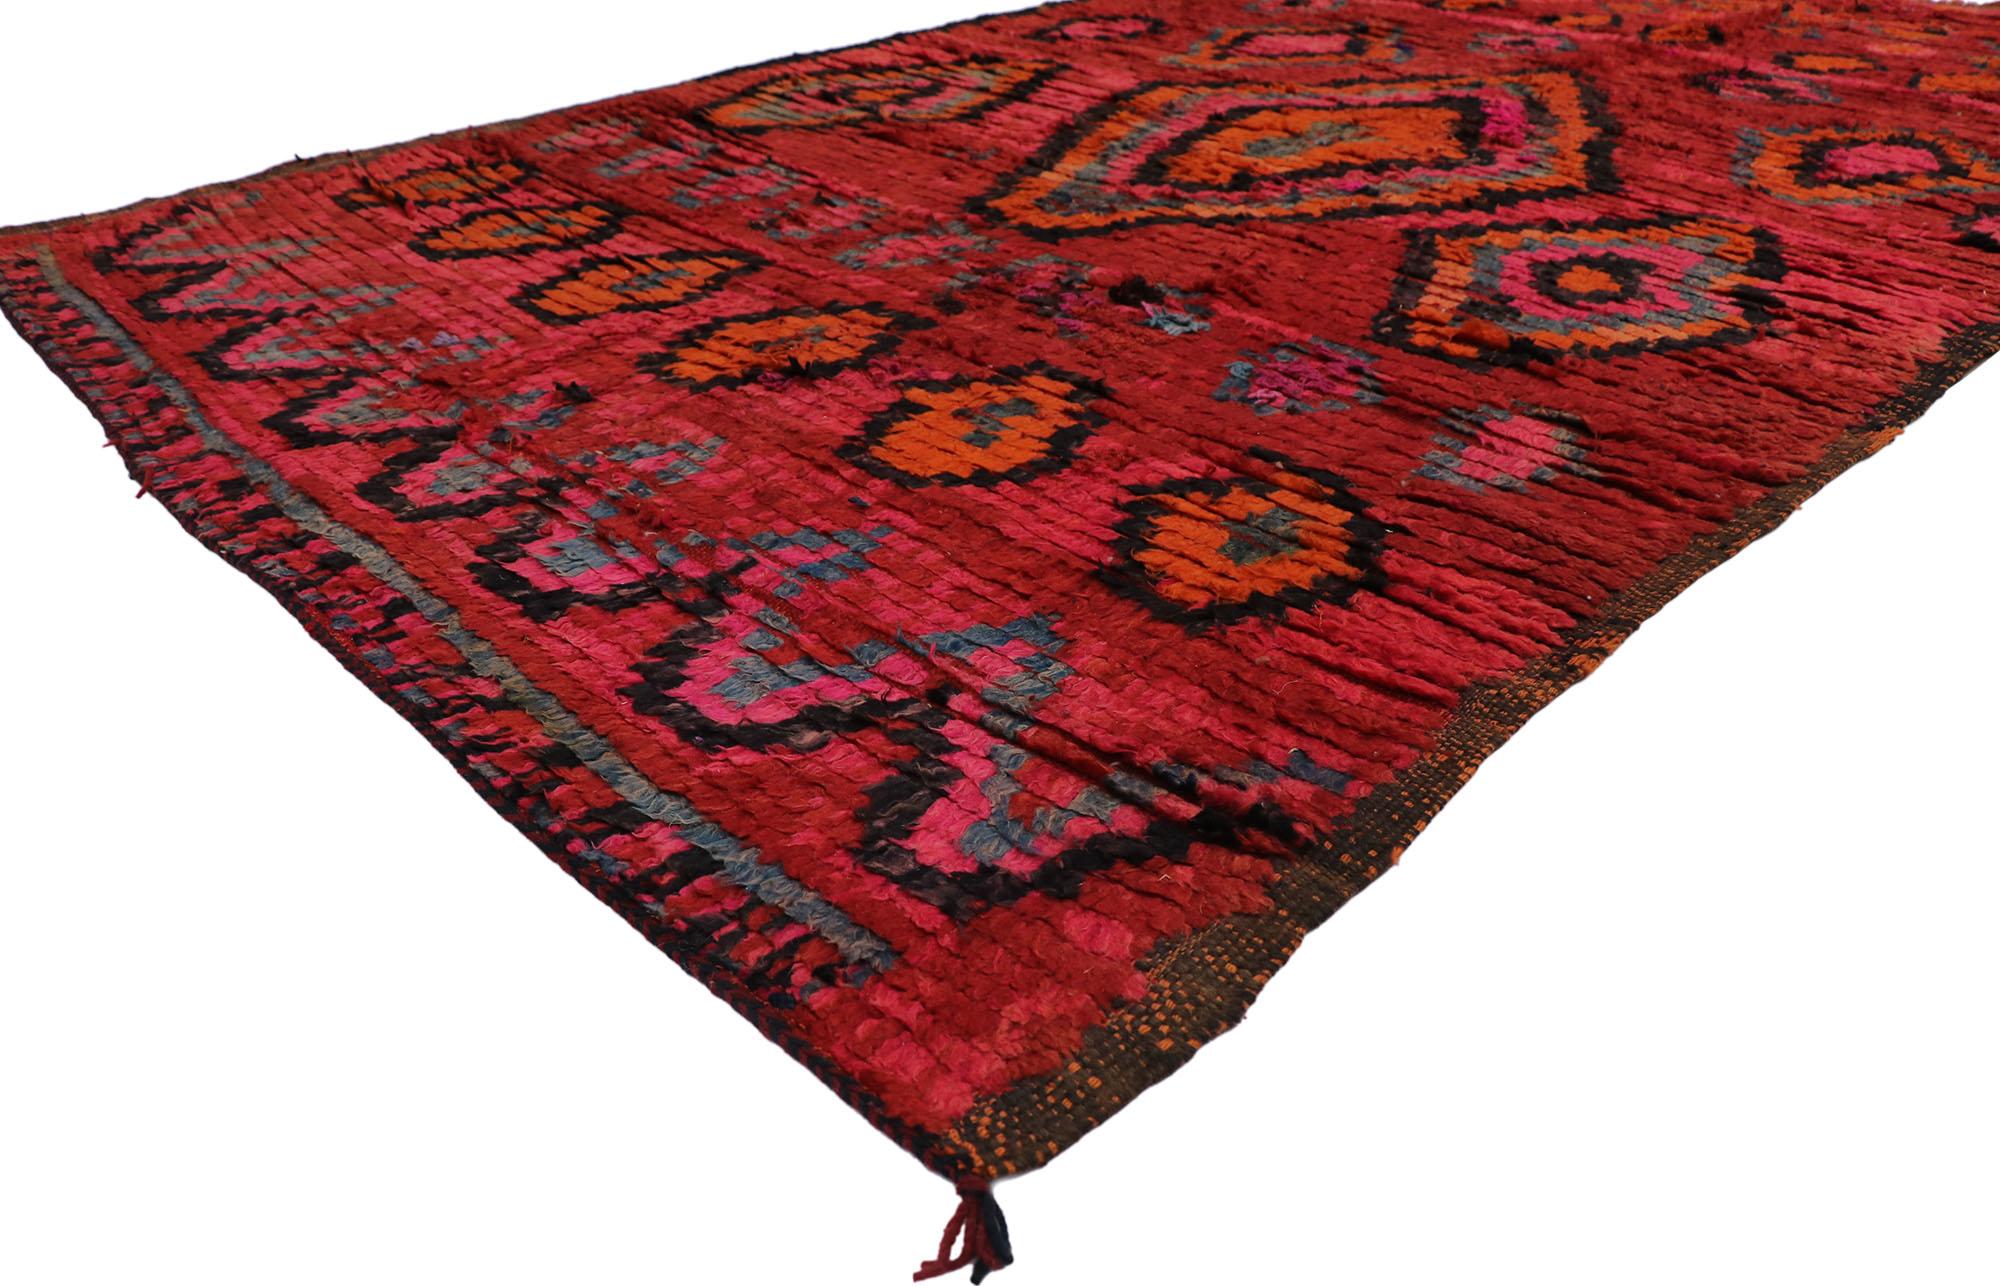 21429 Vintage Red Moroccan Rug, 05'11 x 09'04.
​Maximalism meets bohemian rhapsody in this hand knotted wool vintage Berber Moroccan rug. The intrinsic tribal pattern and saturated colors woven into this piece work together creating layers of joy